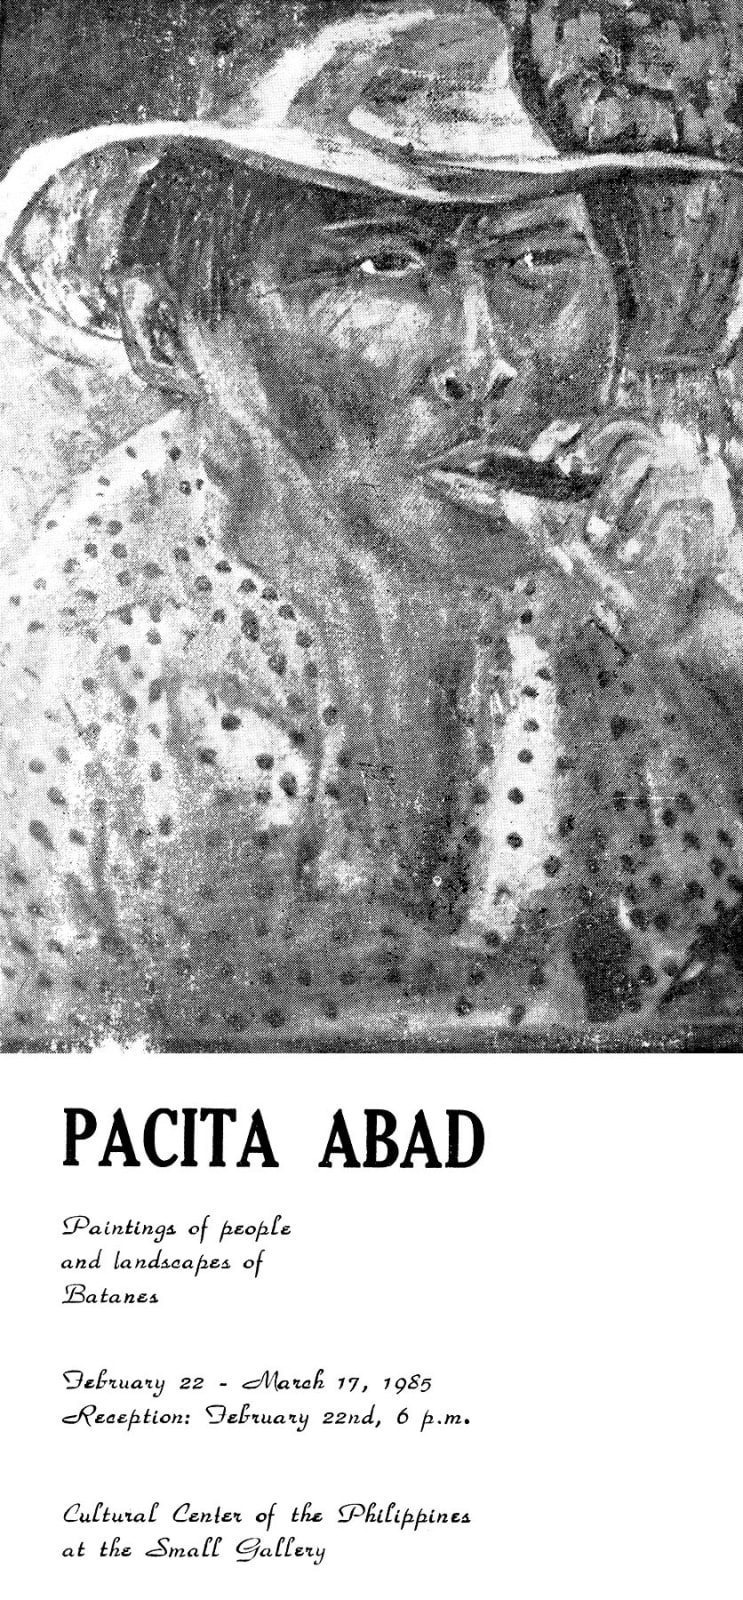 Pacita Abad: Painting of People and Landscapes of Batanes